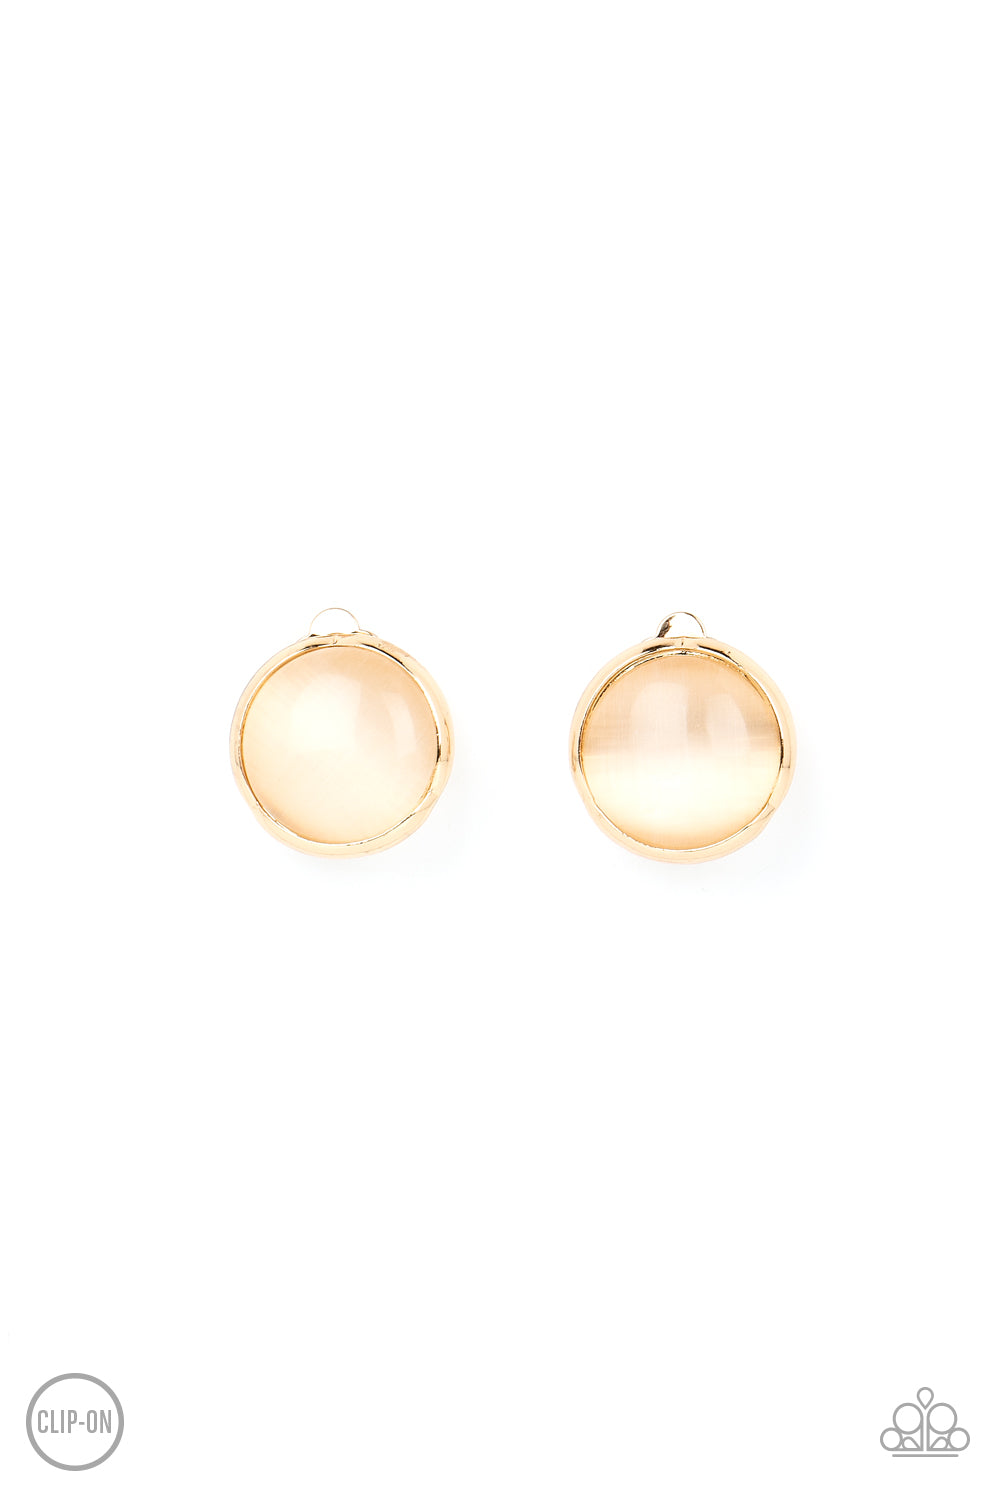 Cool Pools - Gold (Cat's Eye Stone) Clip-On Earring